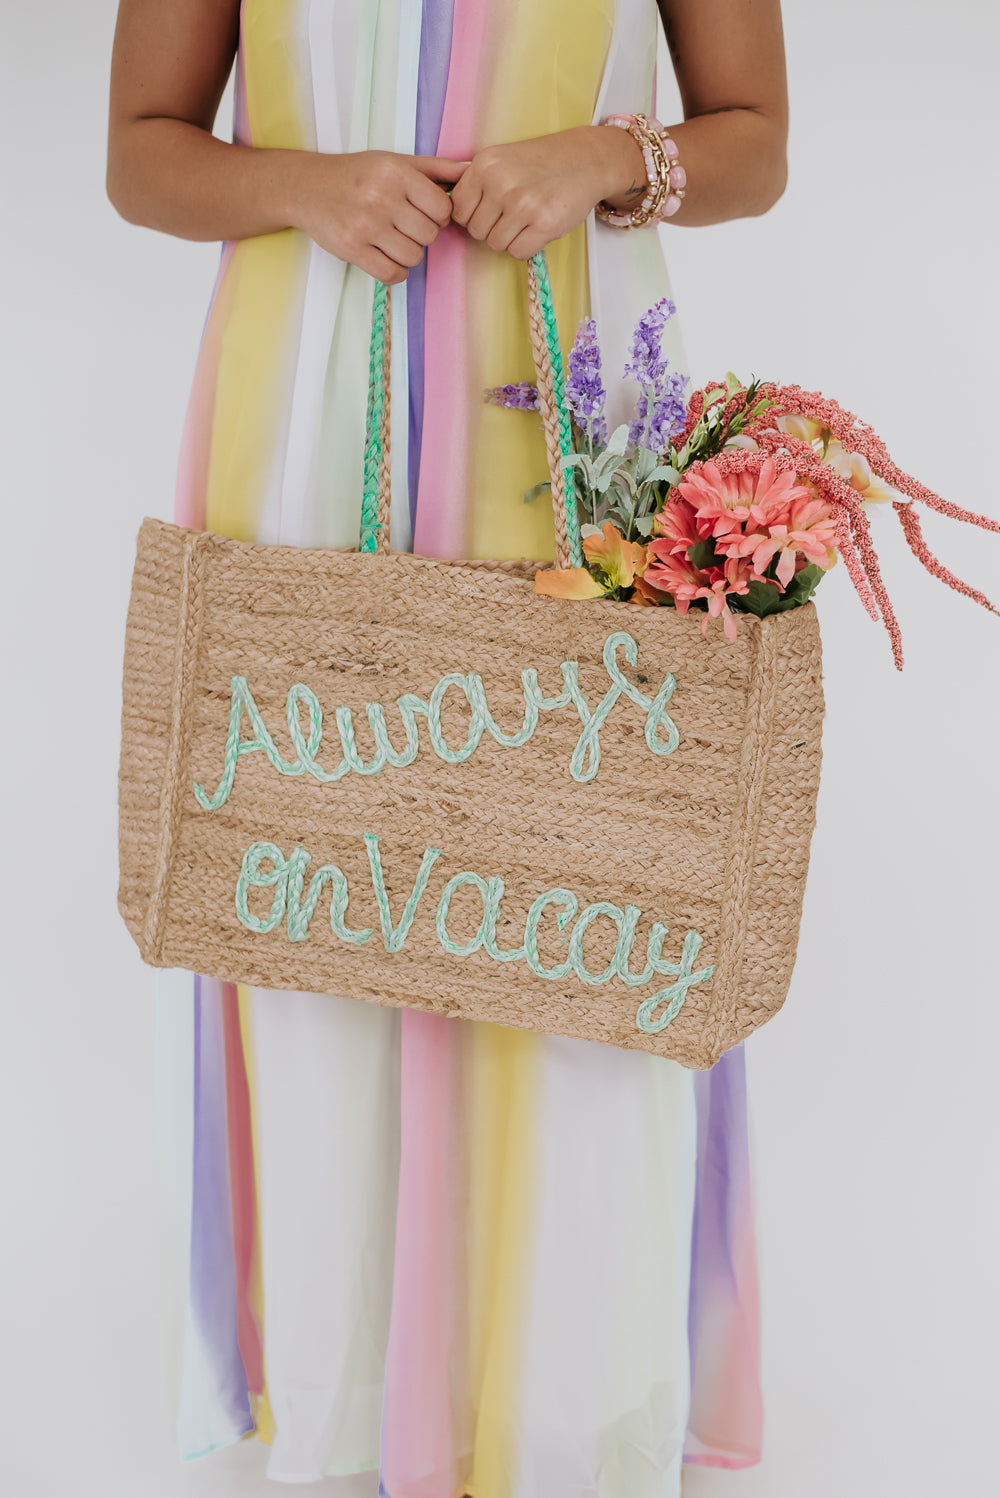 Always On Vacay Tote